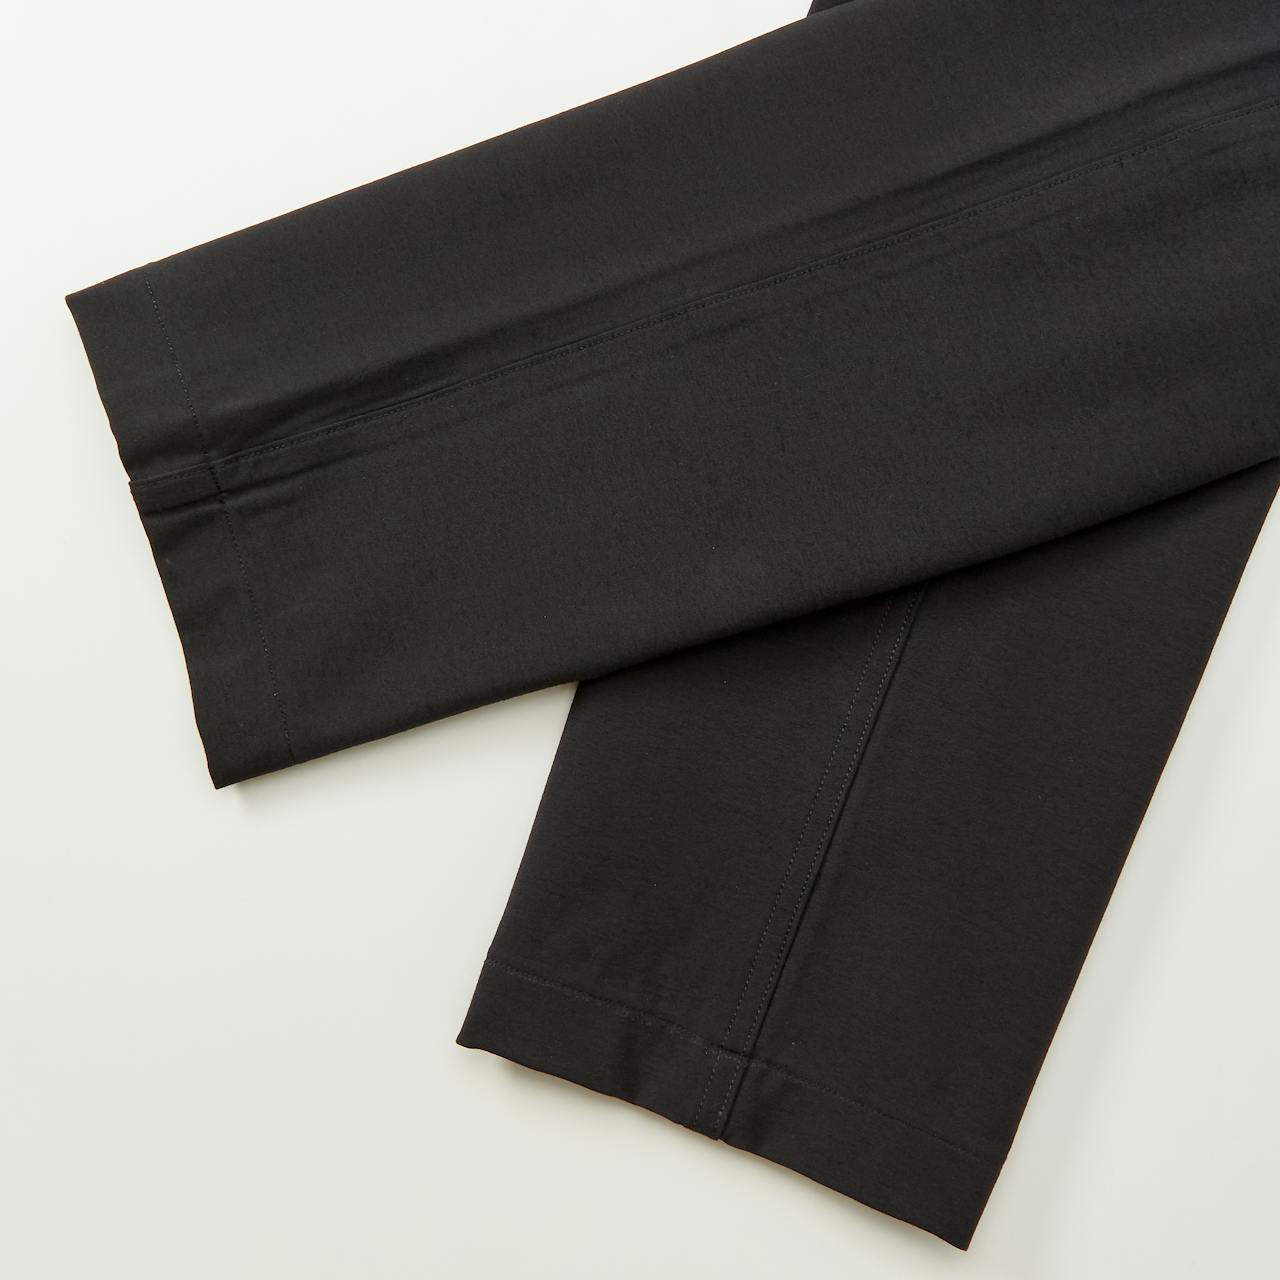 72-Hour Merino Travel Pant - Athletic Tapered